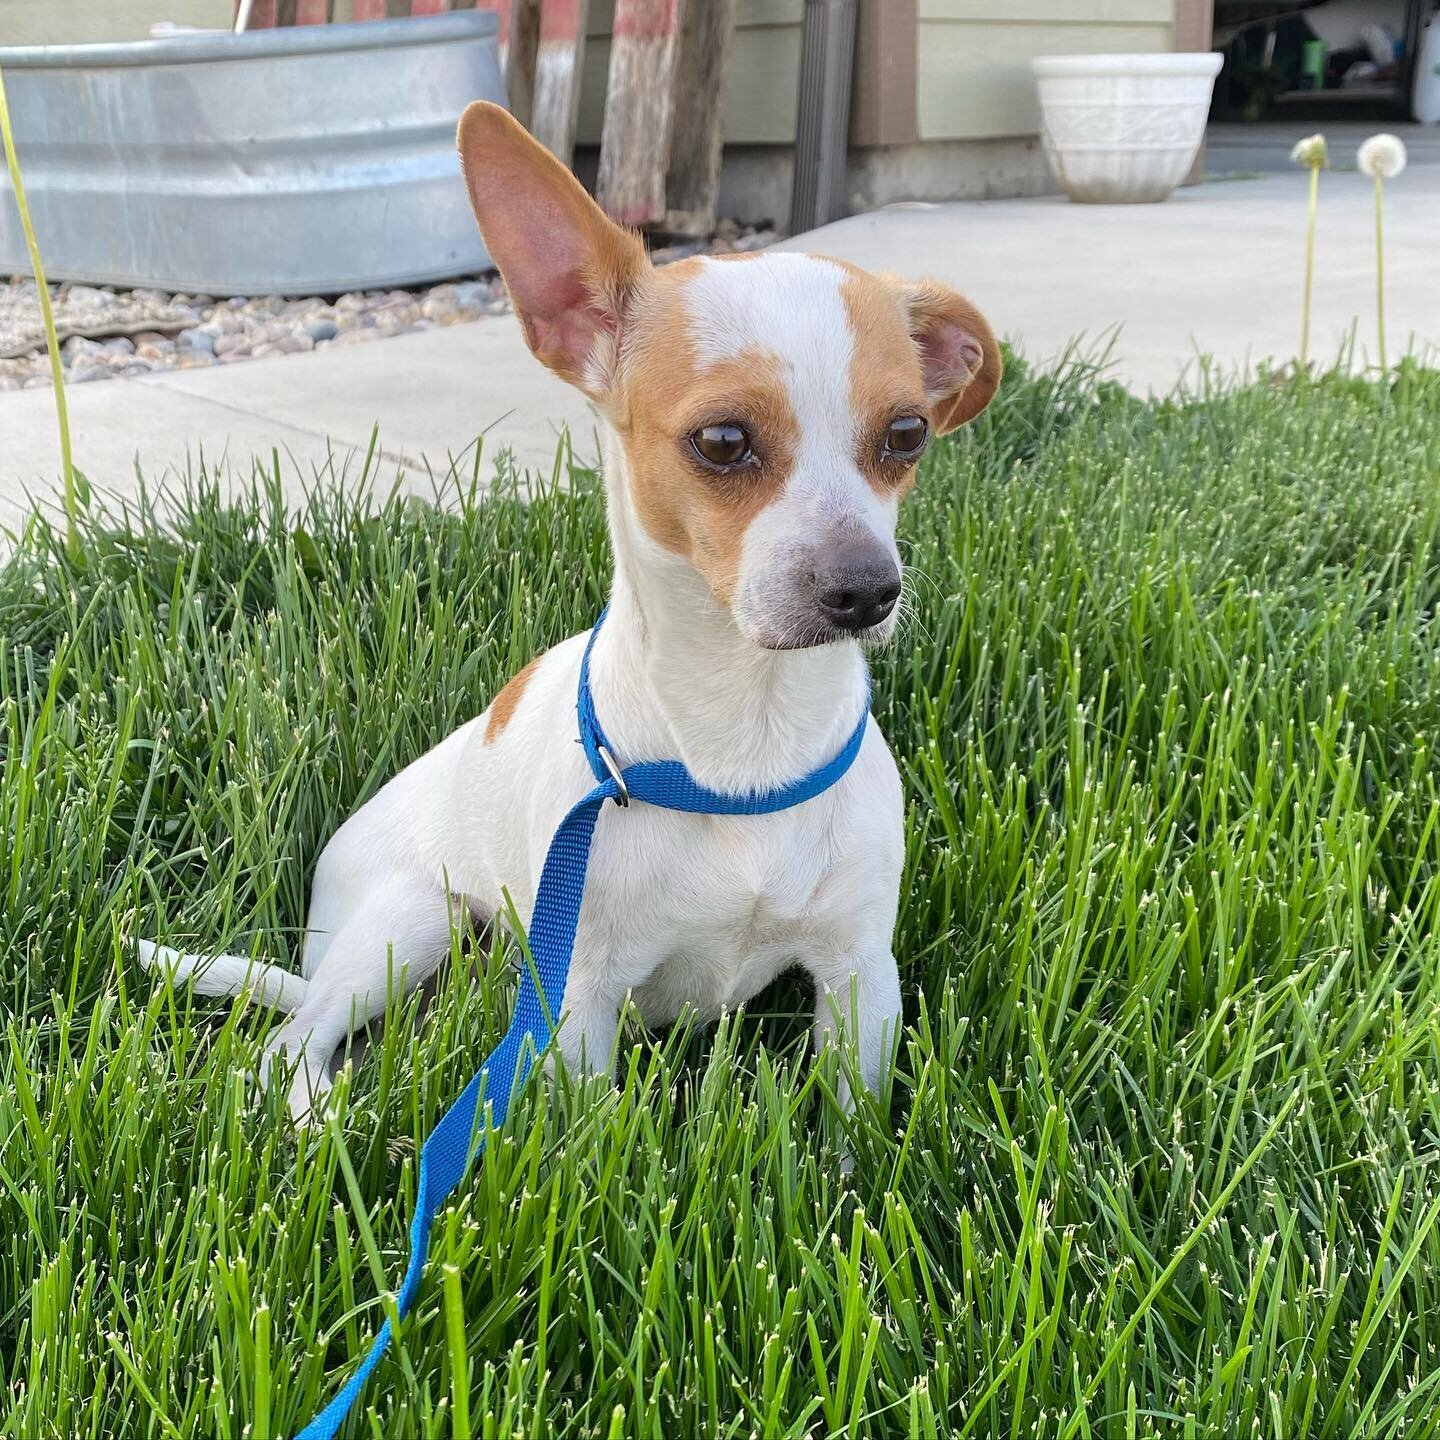 Meet Poppy! This 7-year-old chihuahua mix came to us from the Yakima shelter after being hit by a car and suffering from a torn CCL. We will take her to our friends at Tieton Drive Animal Clinic to assess her options and get her on the road to recove